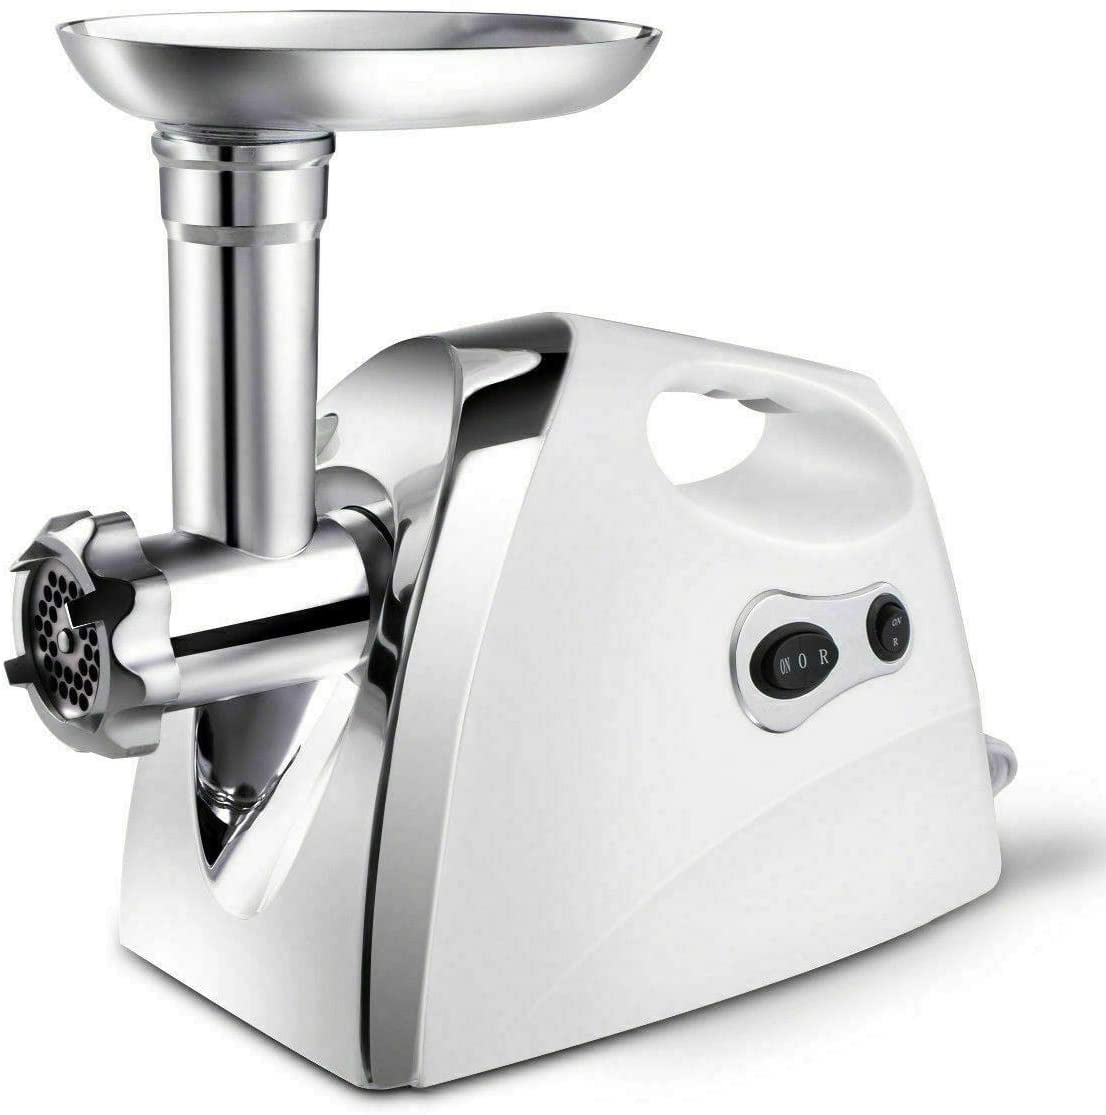 Electric Powerful Meat Grinder Sausage Stuffer Meat Mincer Food Processor 2800W 